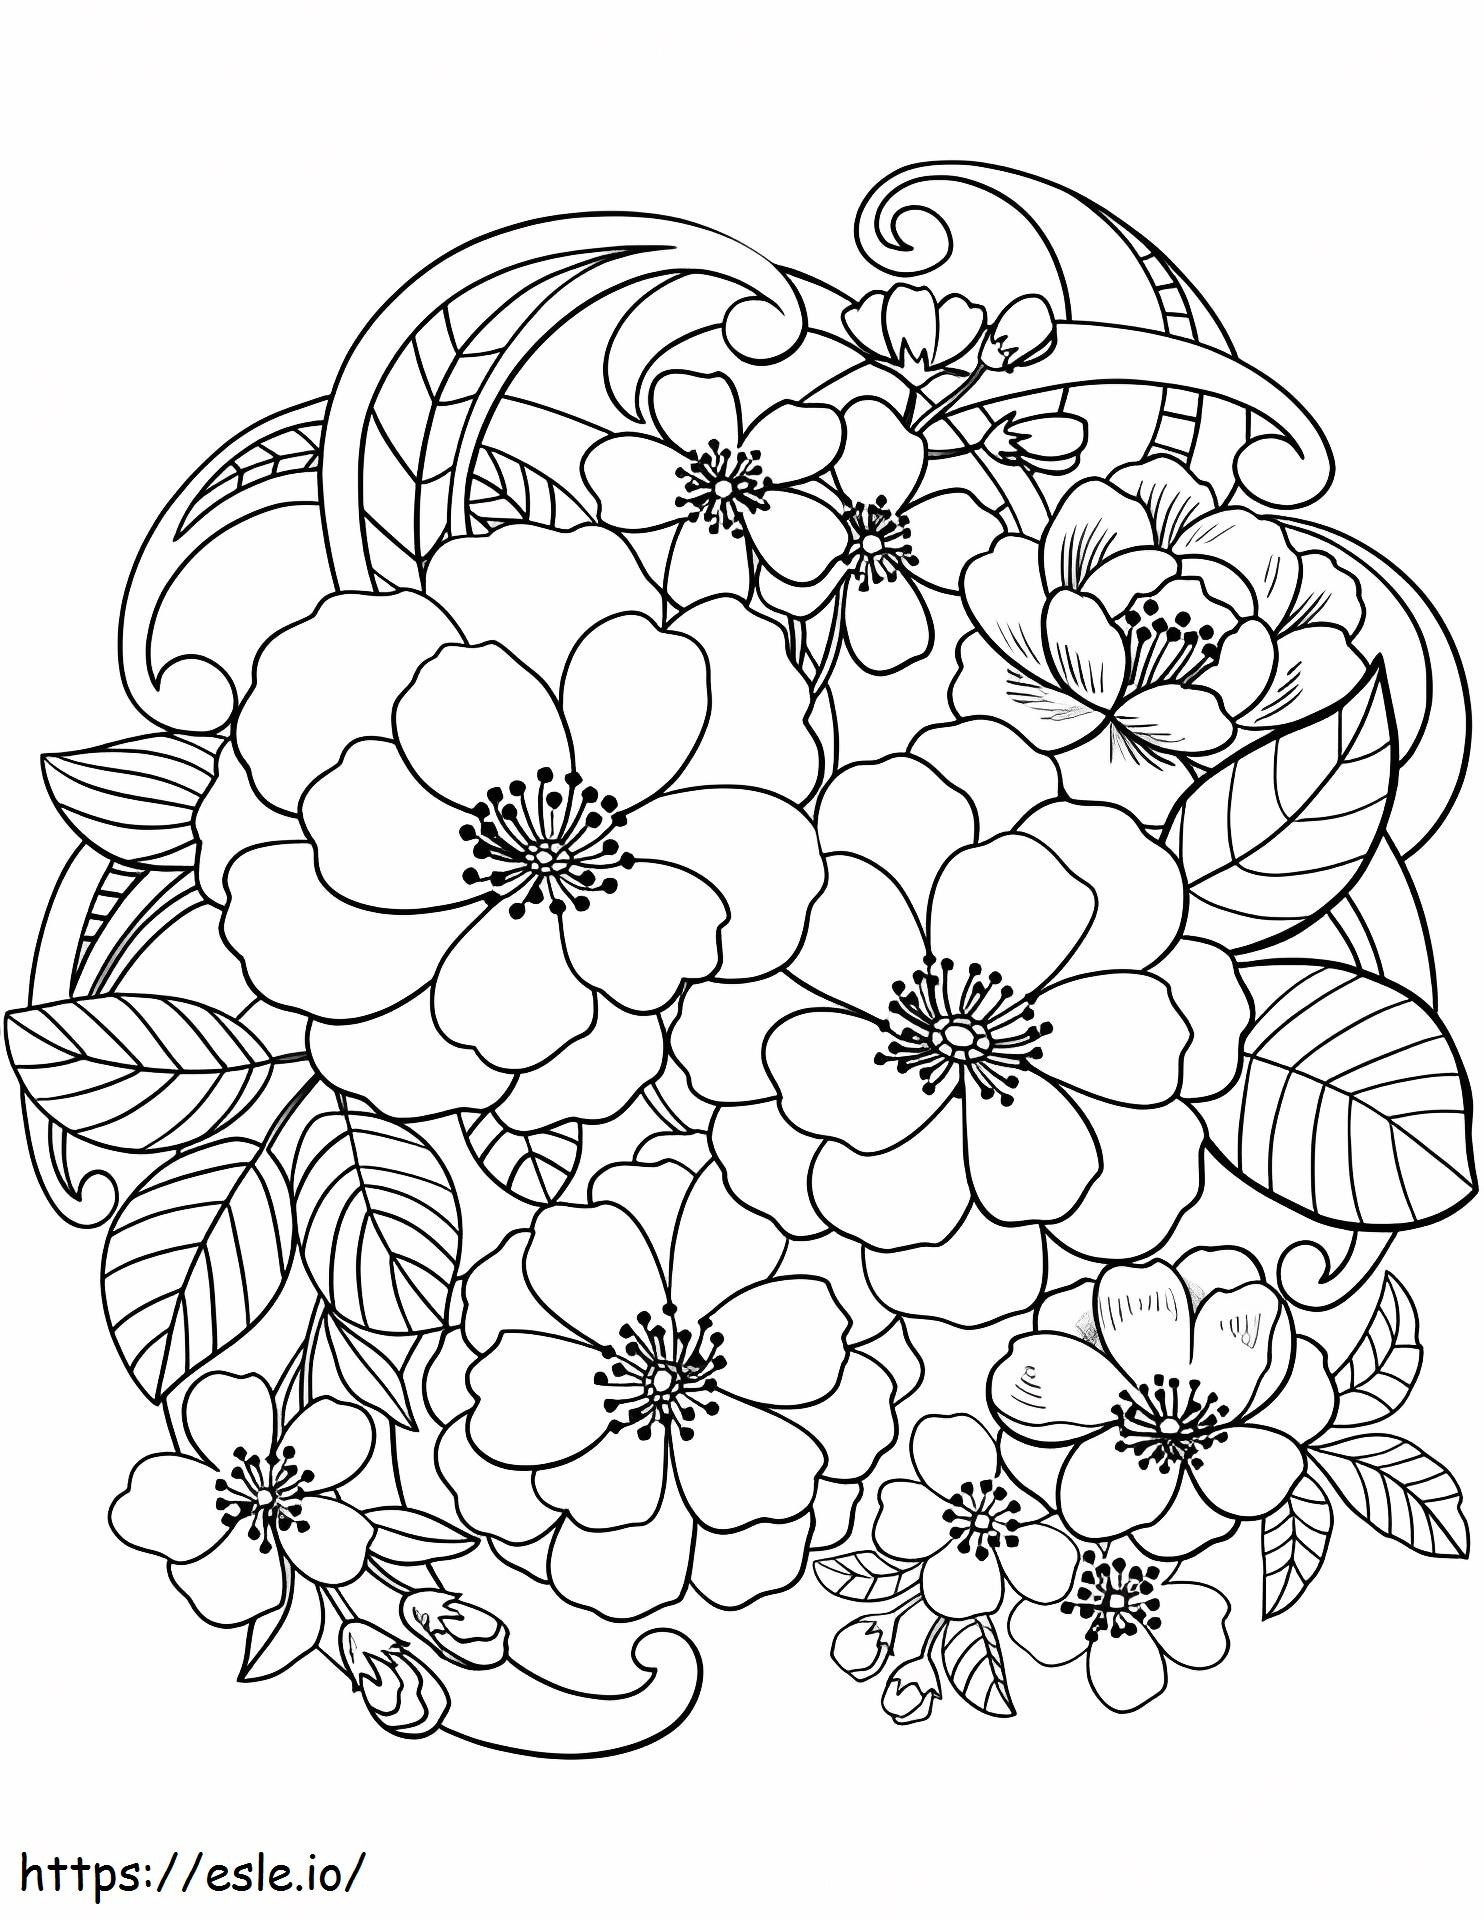 1530149991 Blooming Flowers1 coloring page